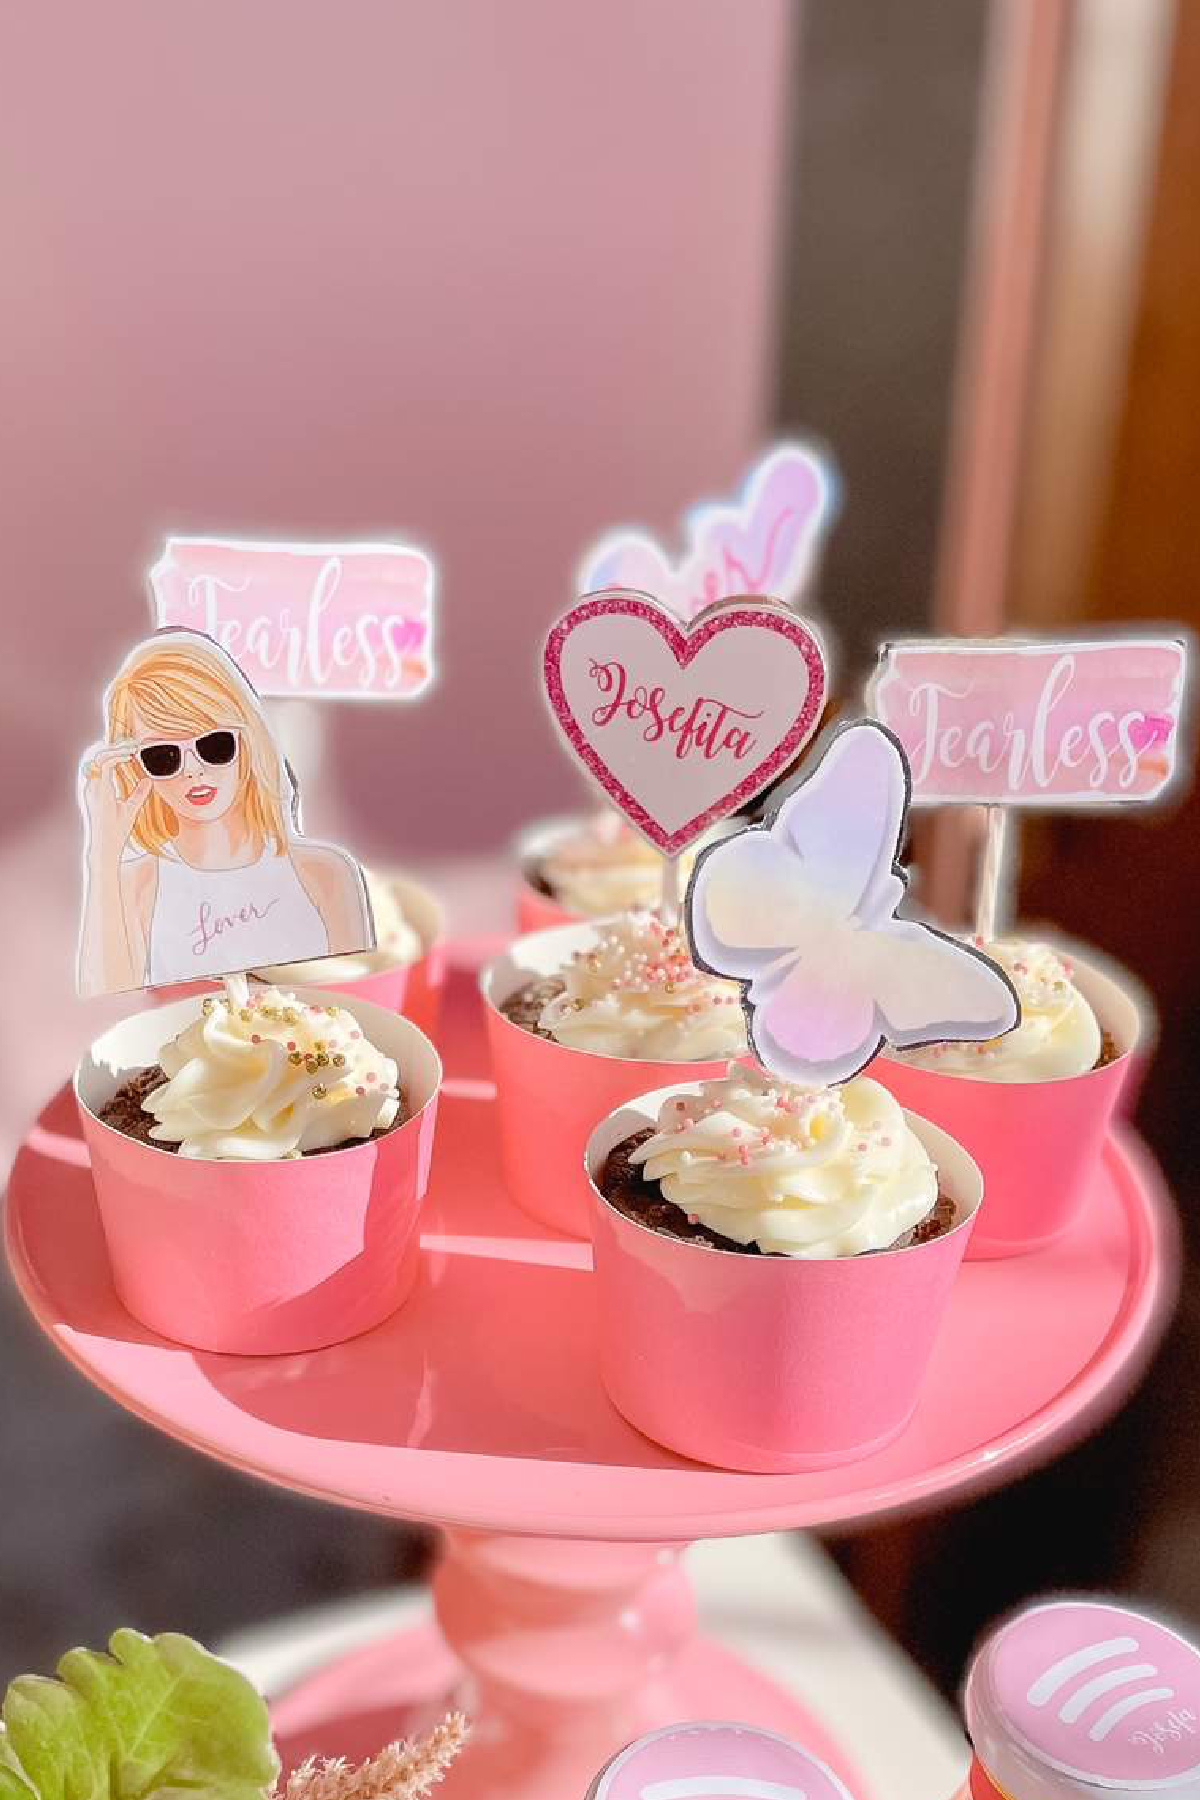 Taylor Swift Cupcakes